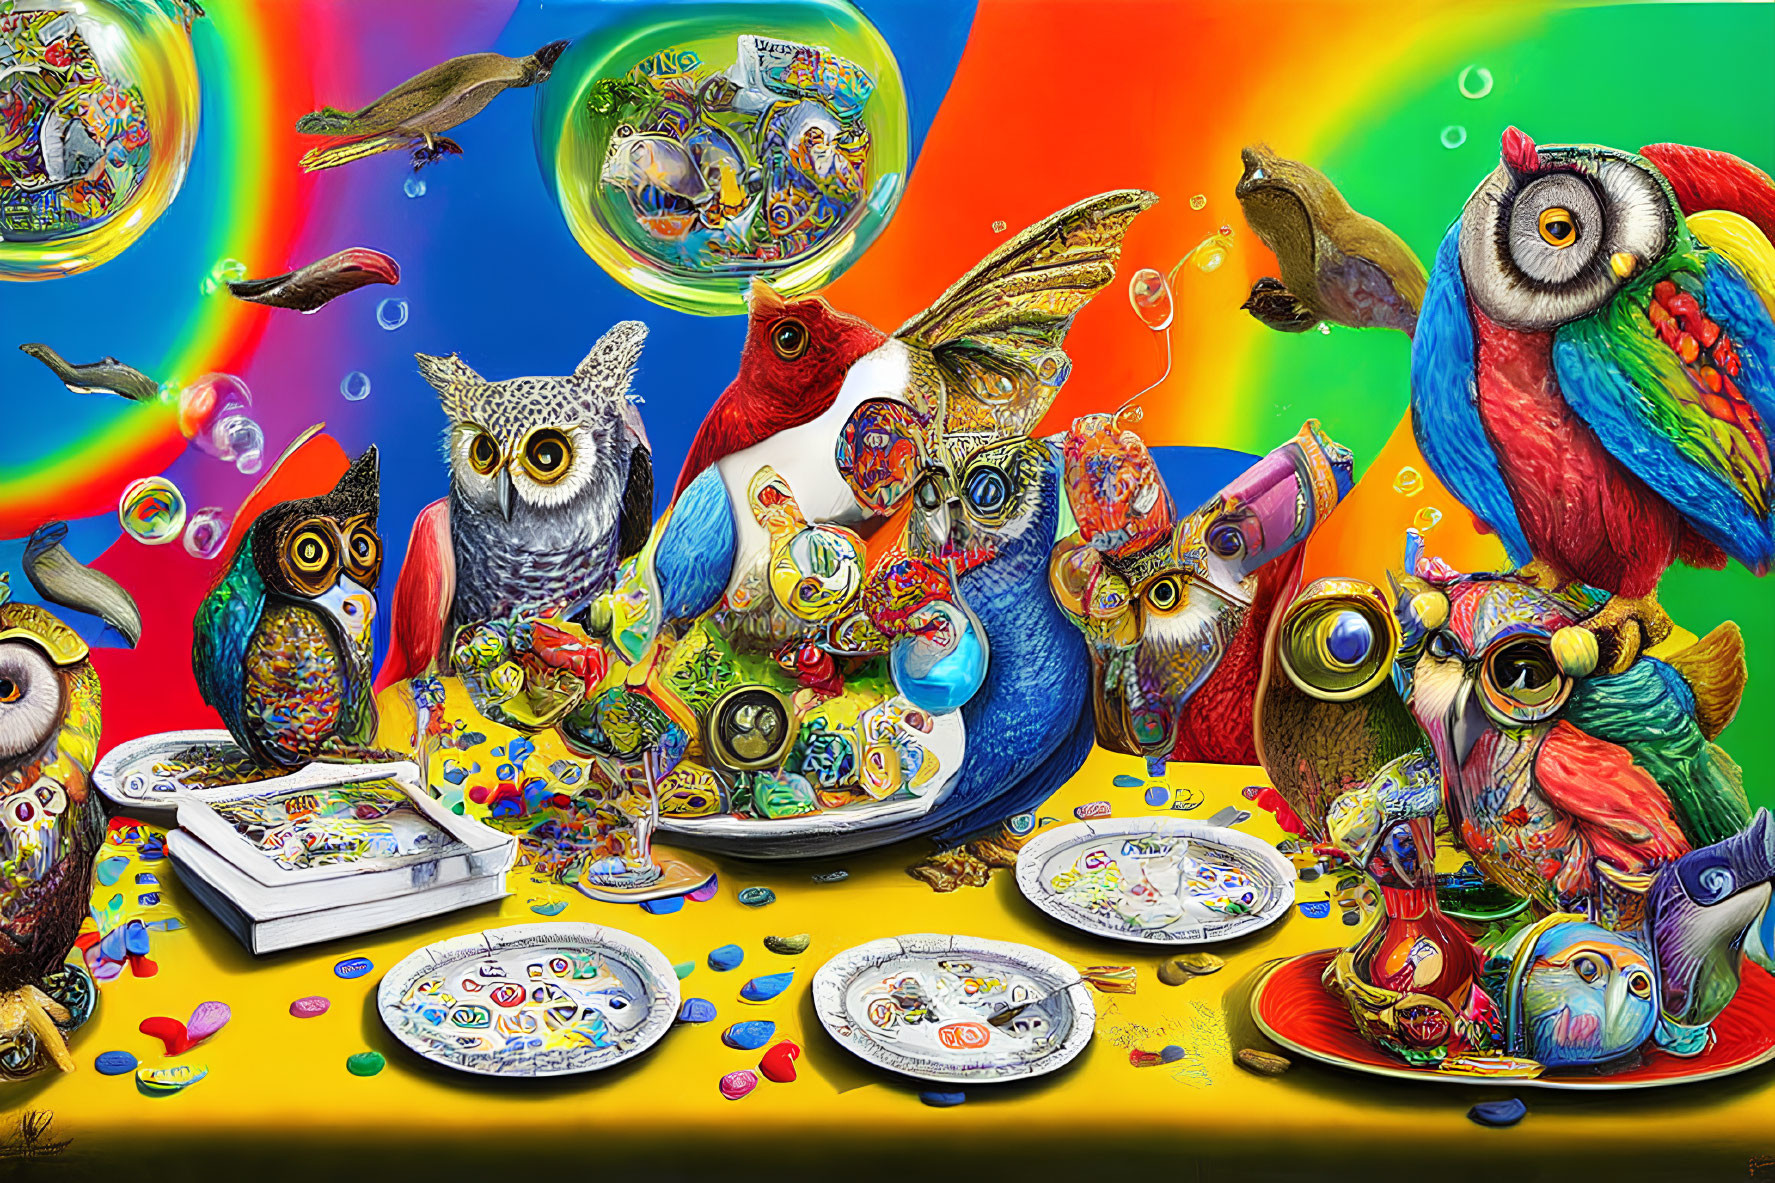 Vivid Owl Artwork with Colorful Patterns and Rainbows